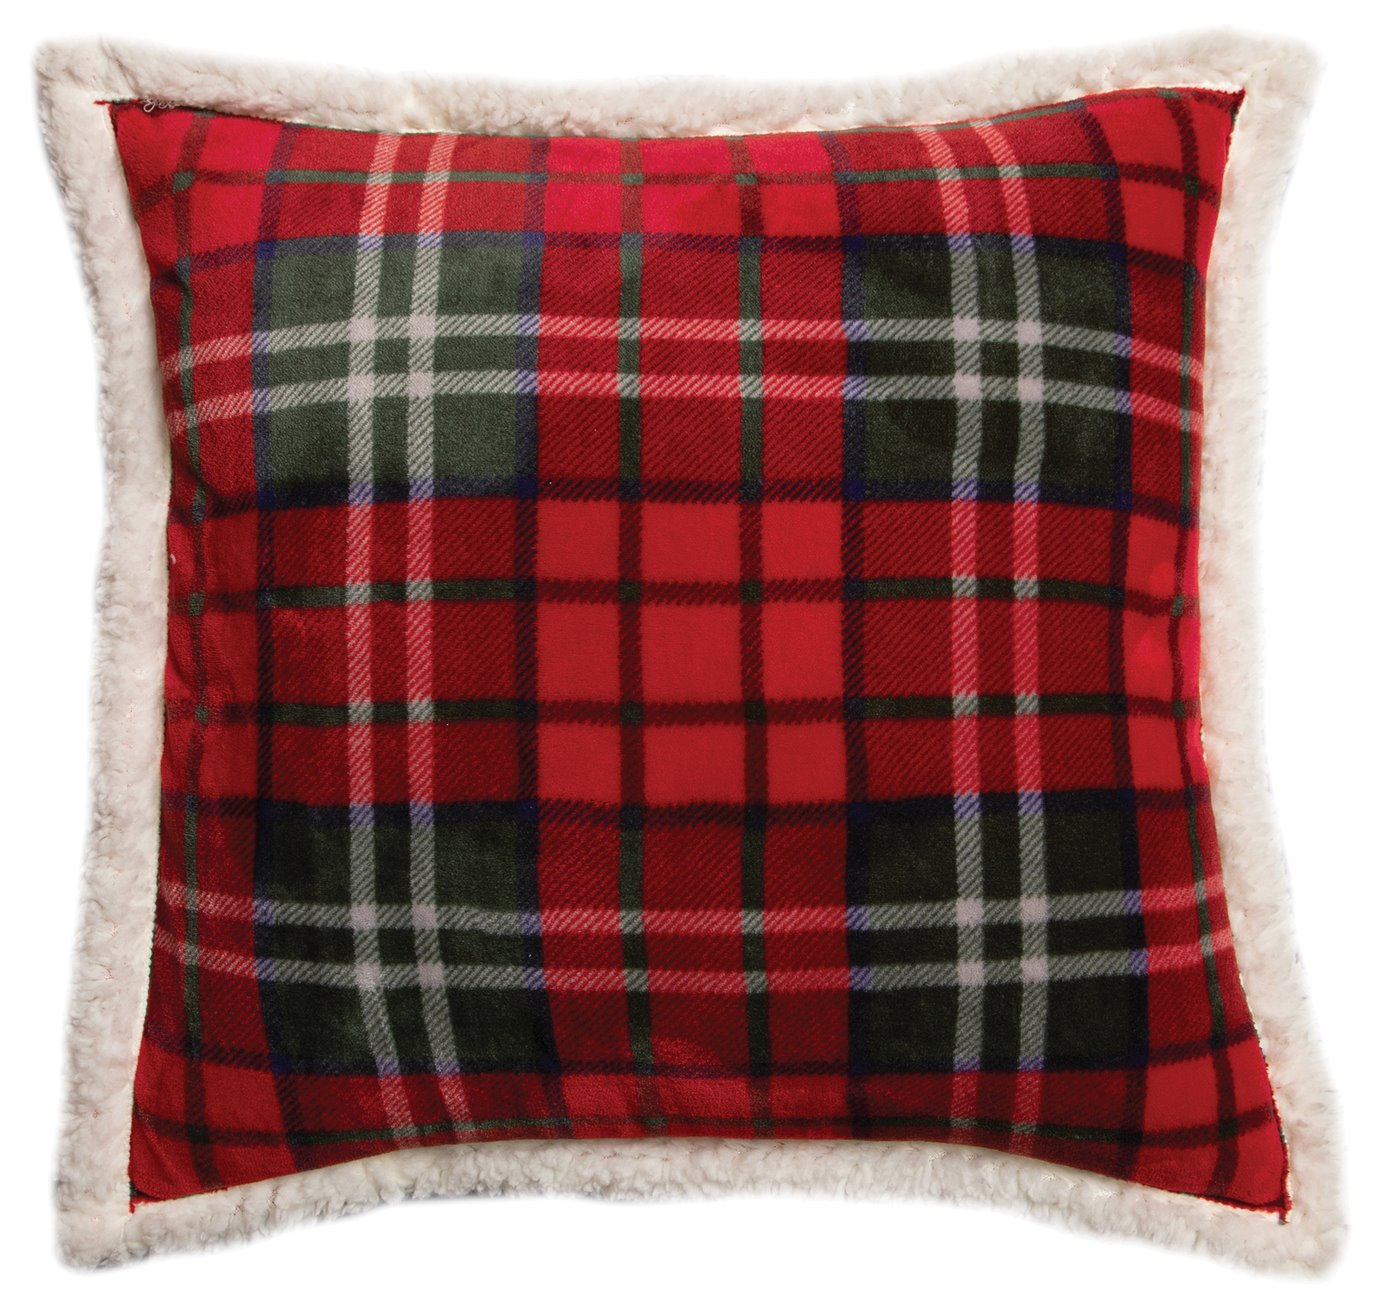 Holiday Red Plaid Sherpa Throw Pillow (Insert Included) 18" x 18"